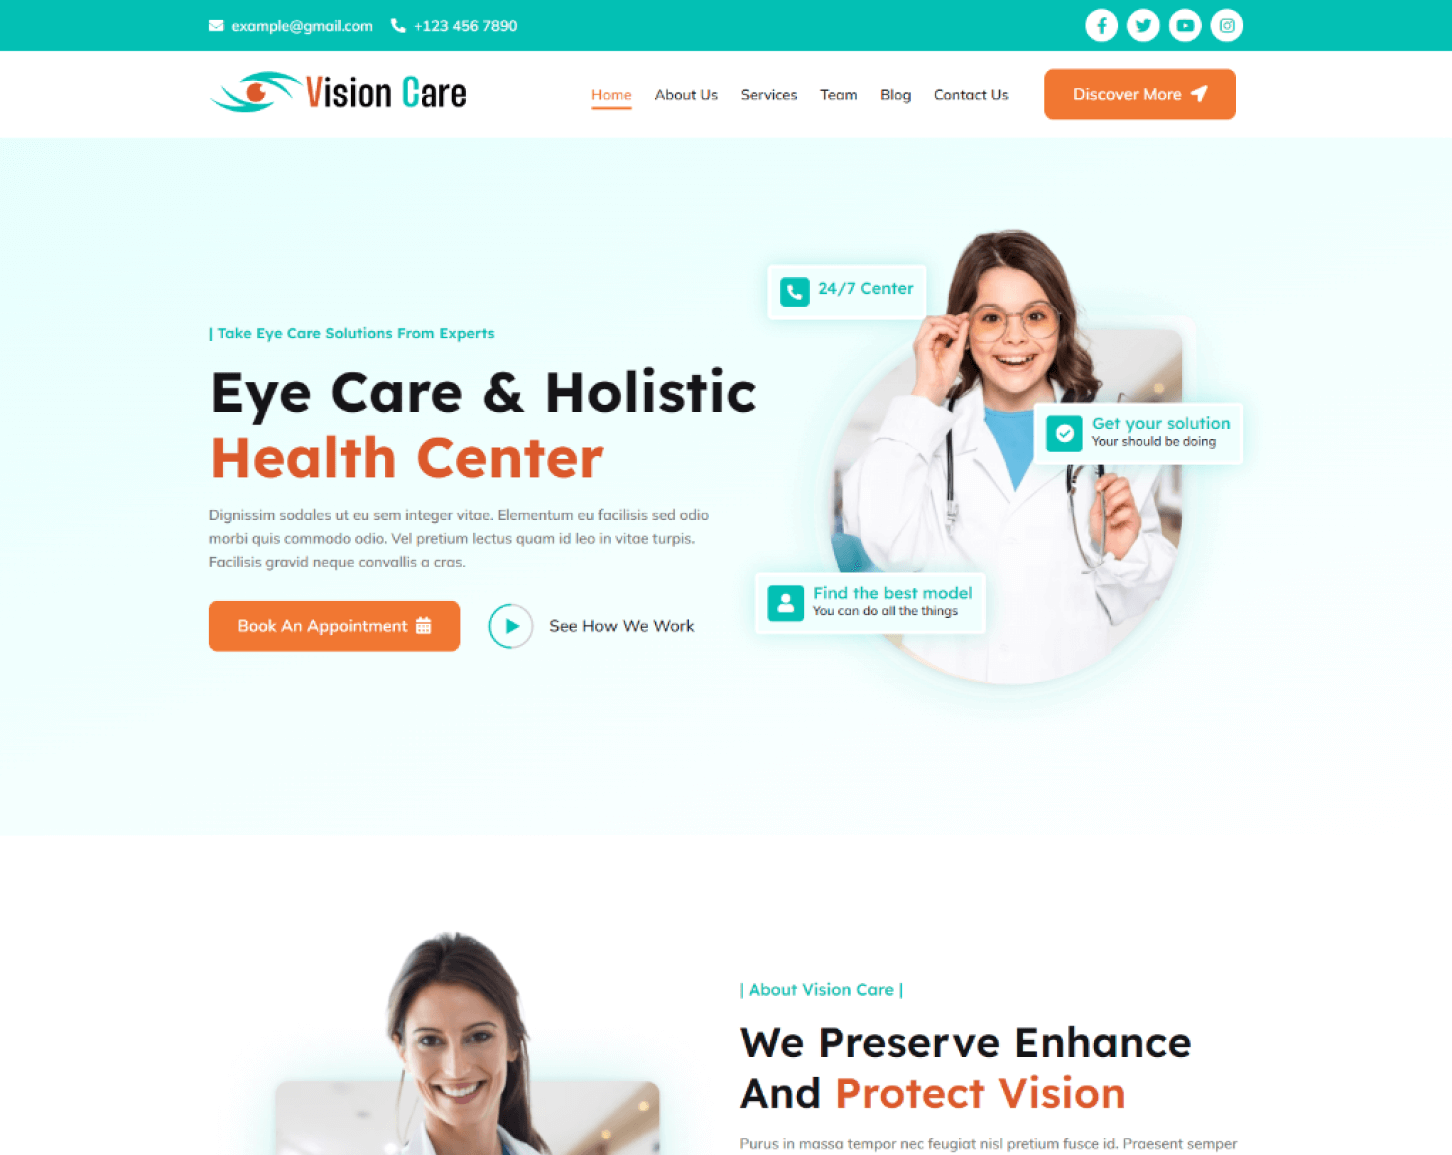 Vision Care Home Page